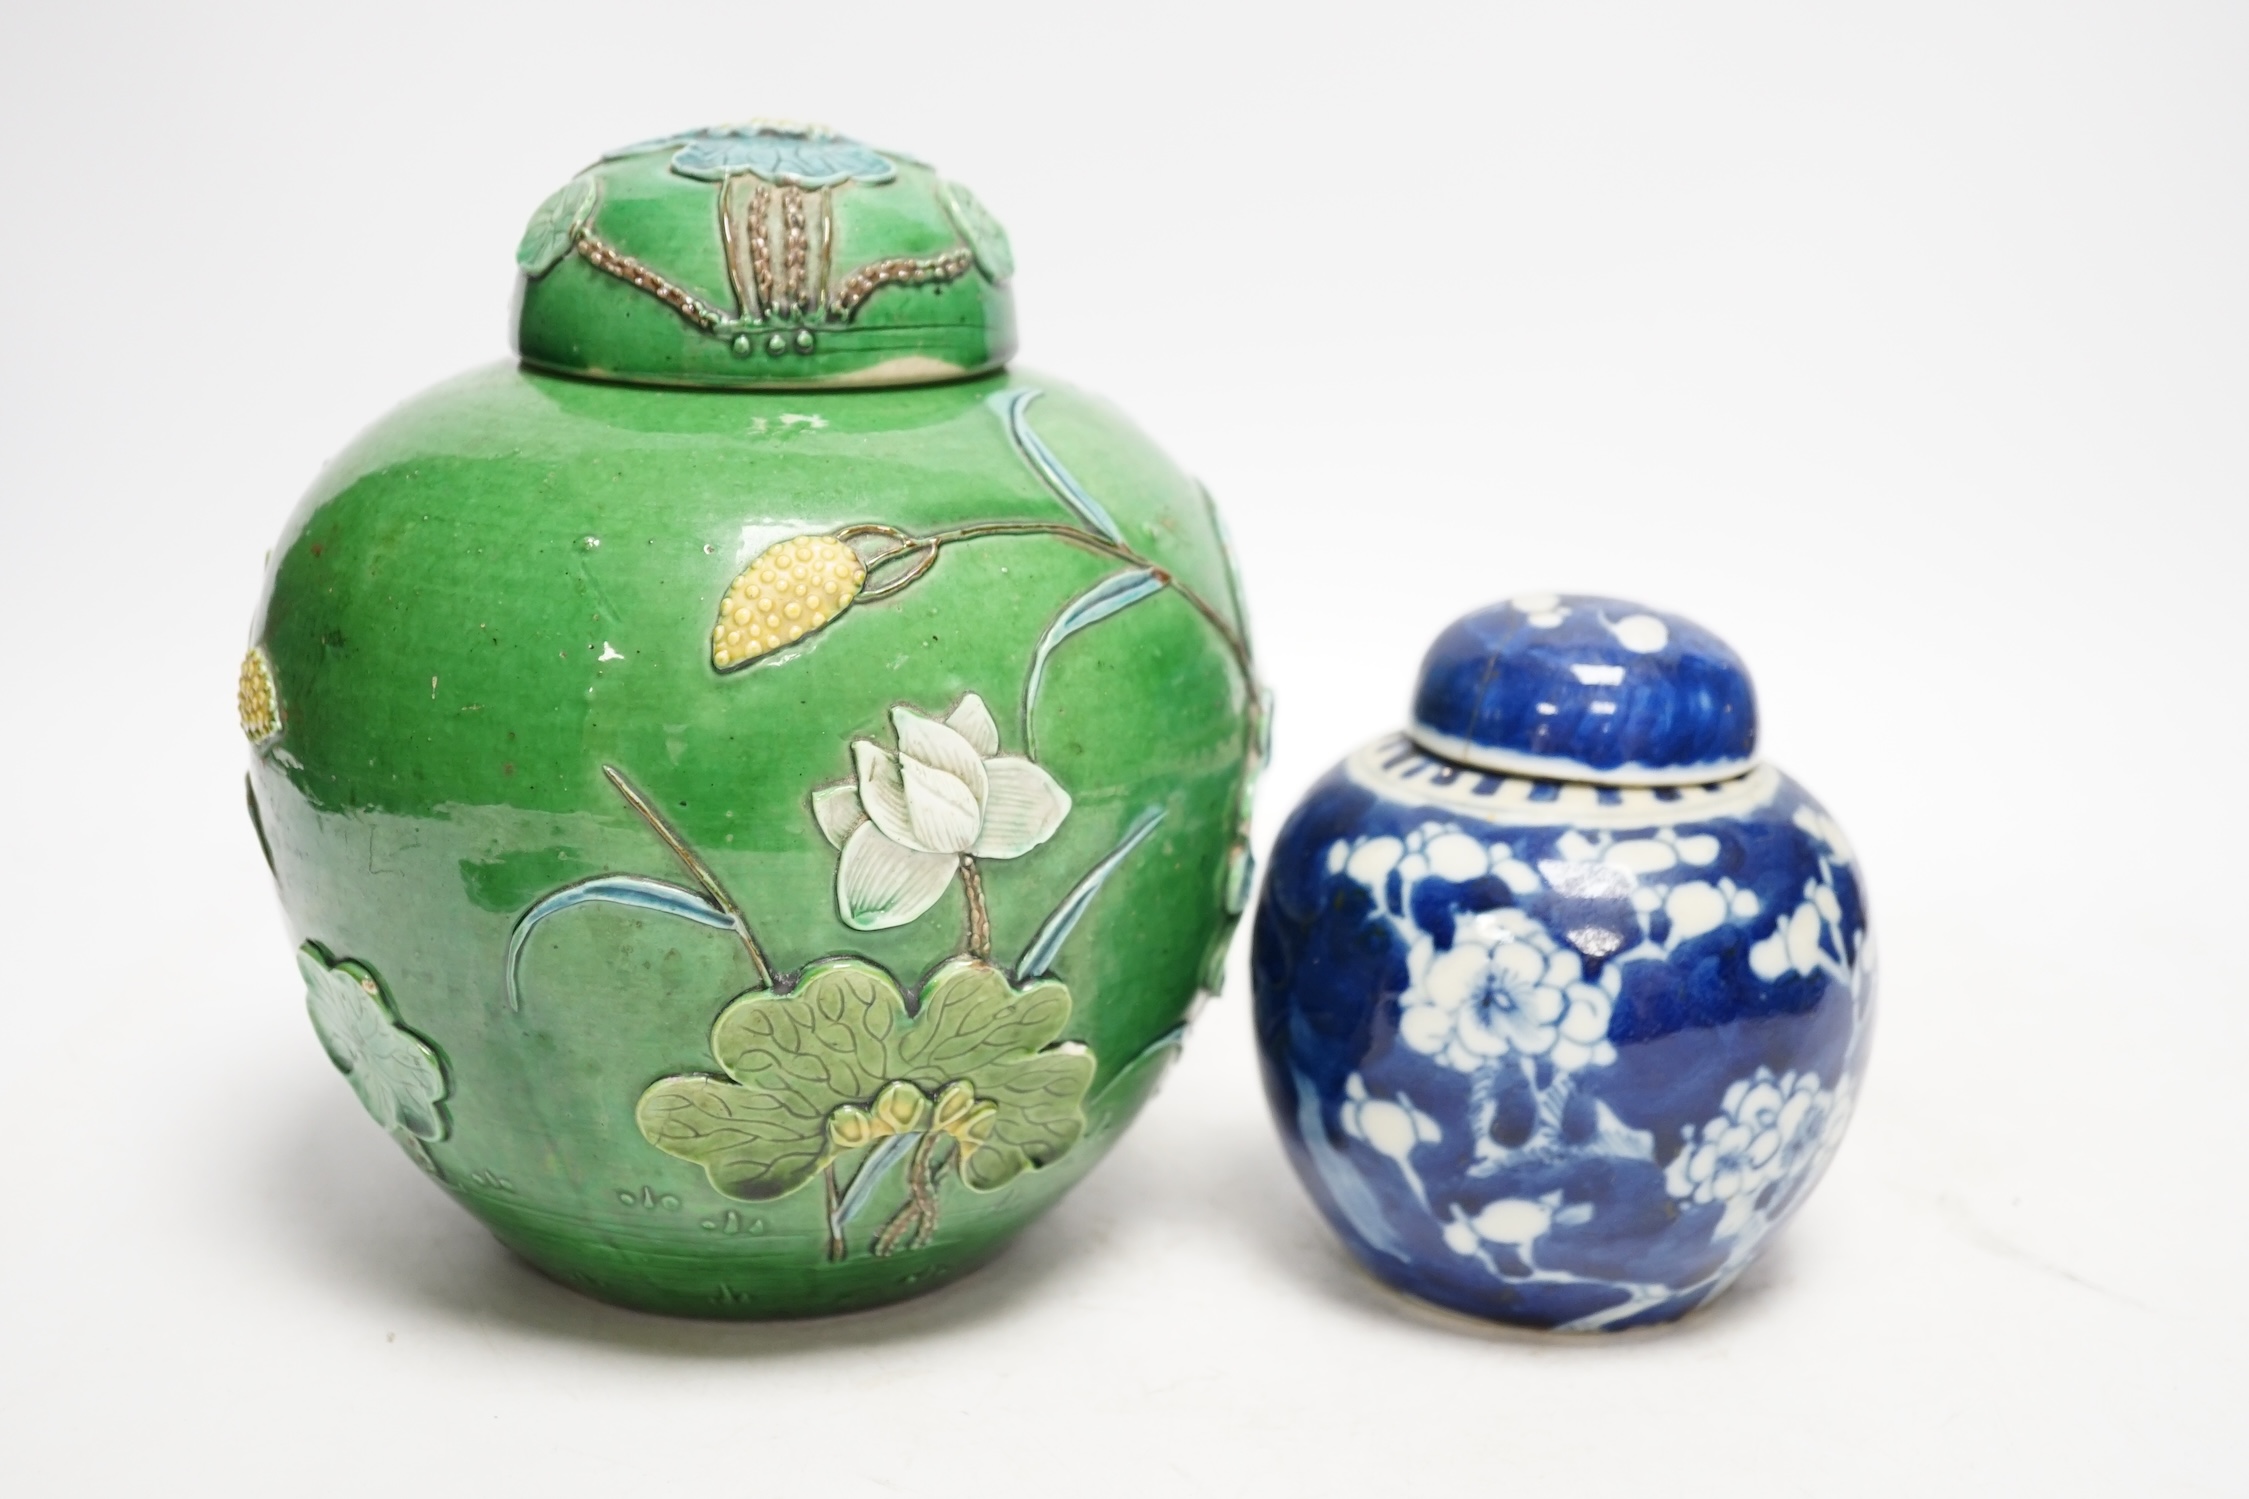 Two Chinese lidded ginger jars, one with applied decoration and the other with blue and white prunus decoration, tallest 18cm. Condition - fair, one lid restored